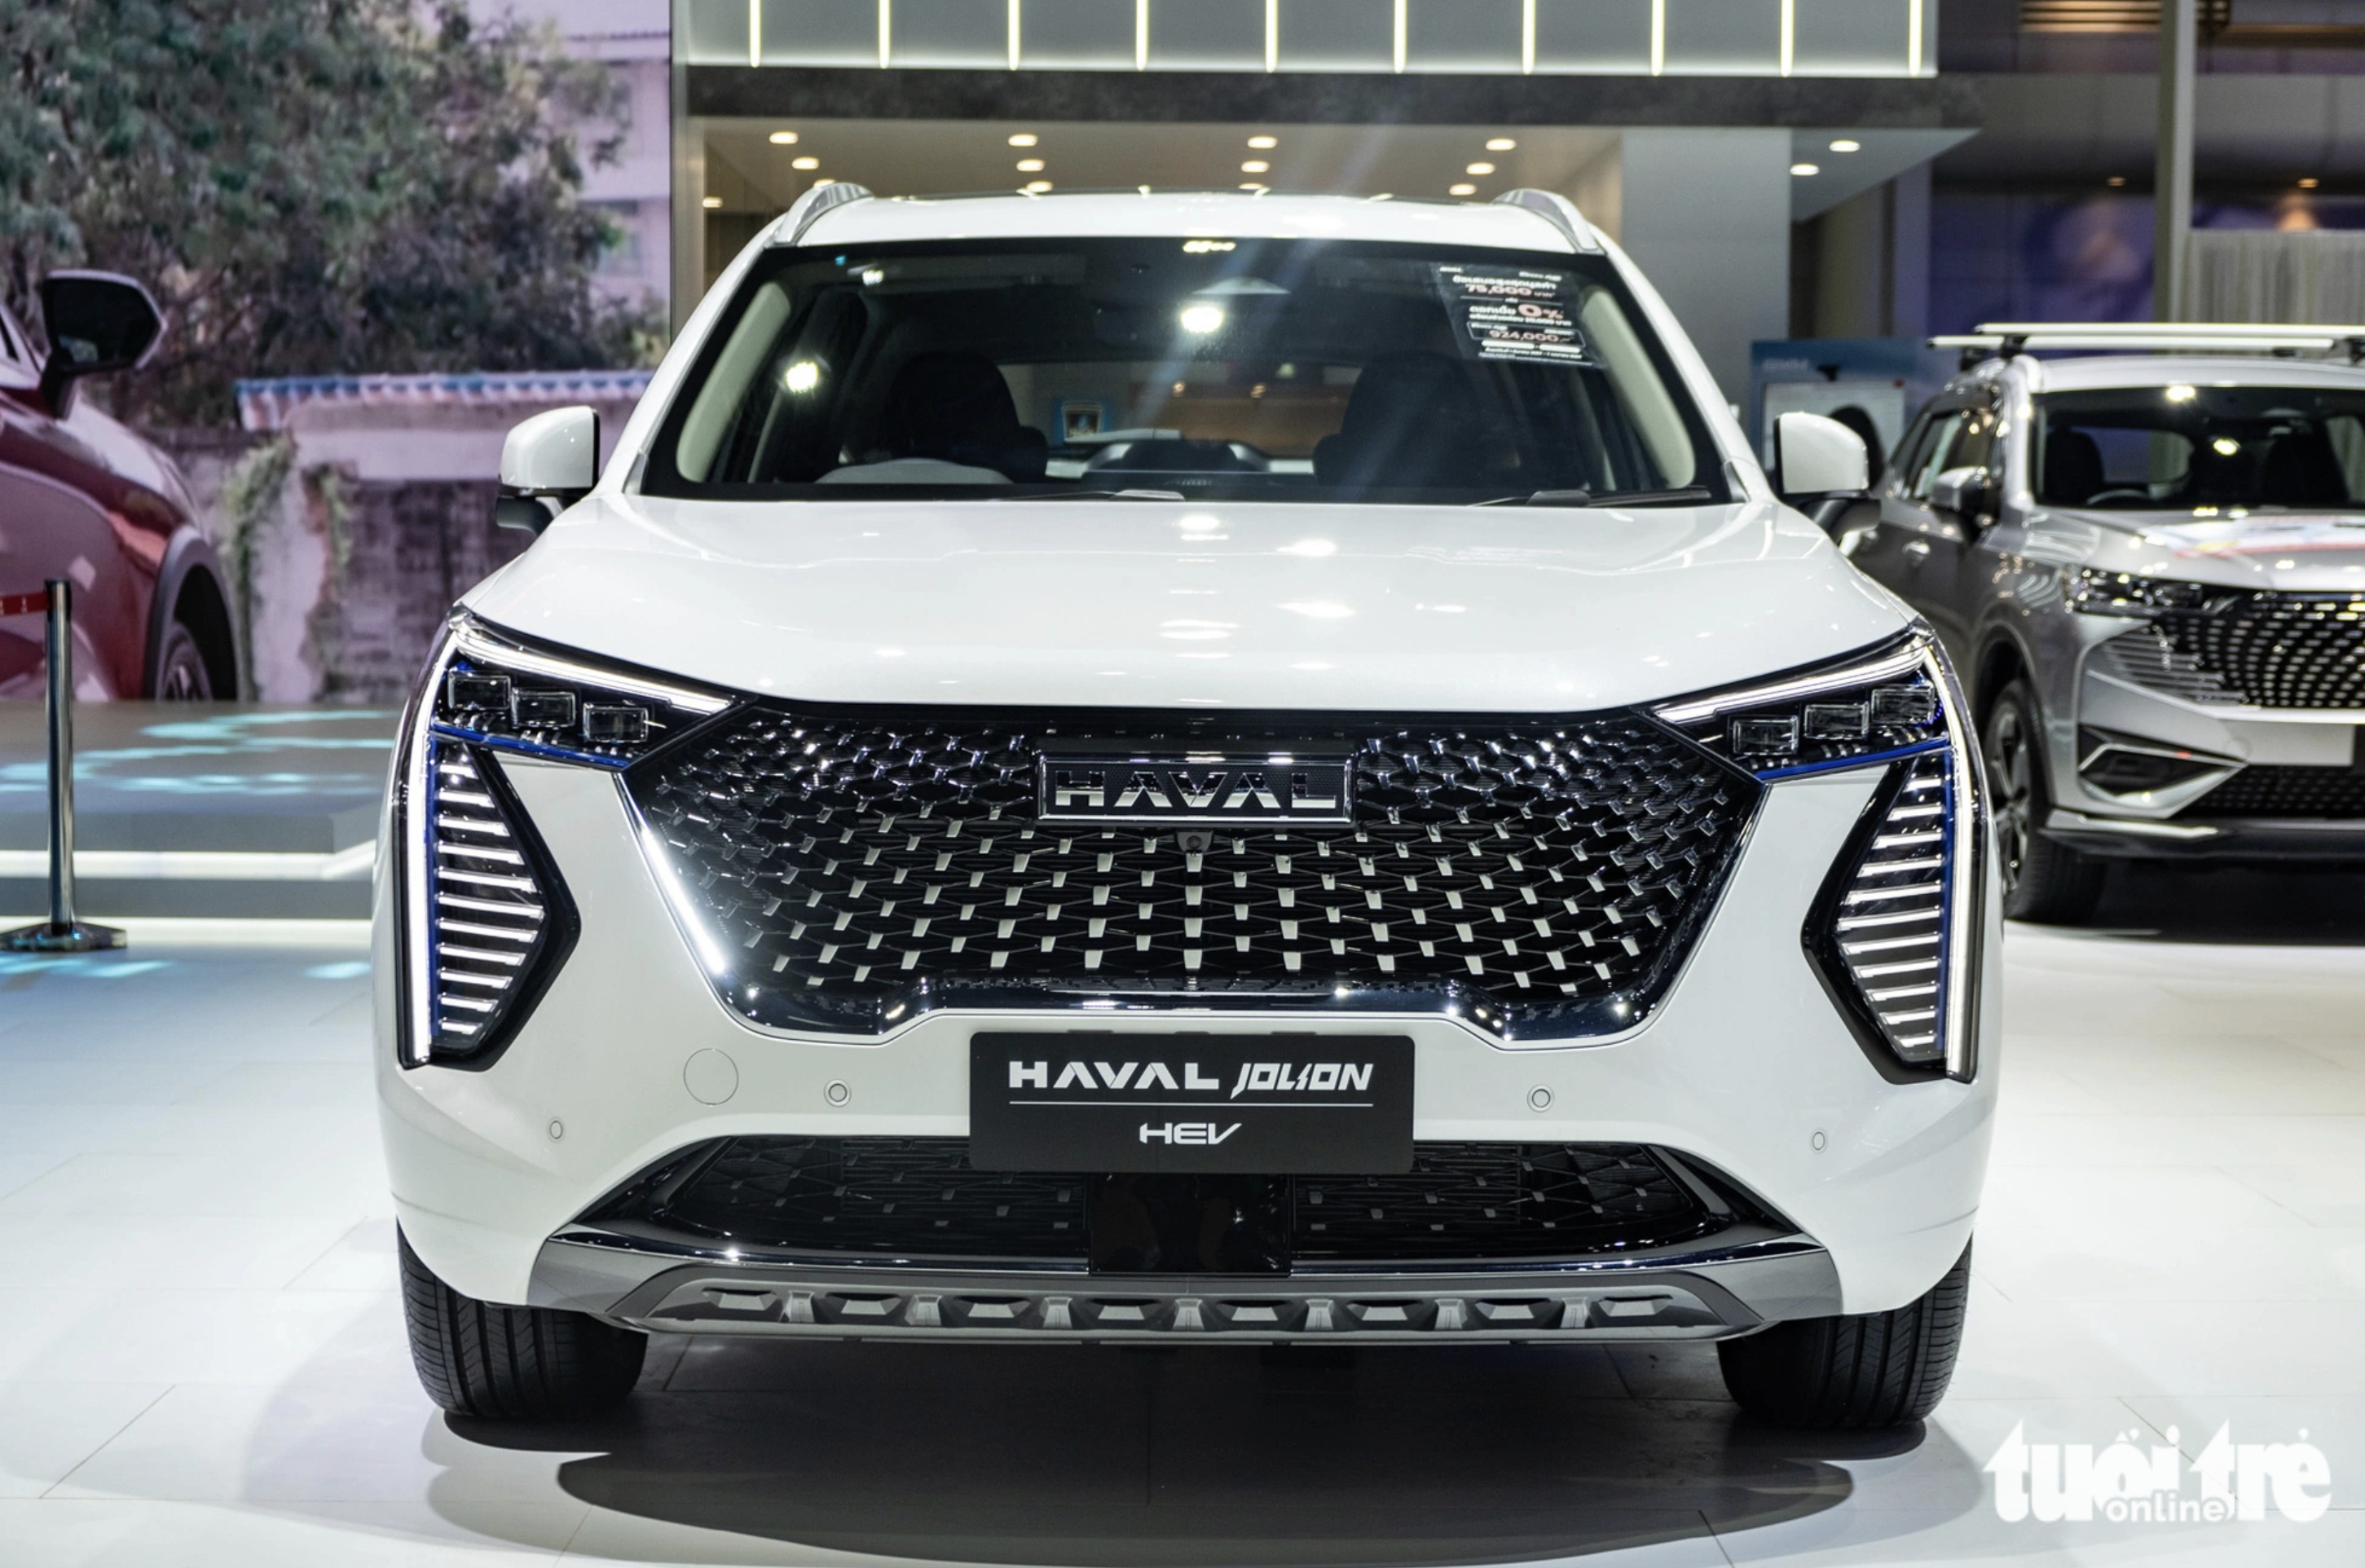 The Jolion is equipped with a sweeping front grille, dynamic front lights, and automatic LED headlights. Photo: Quoc Minh / Tuoi Tre